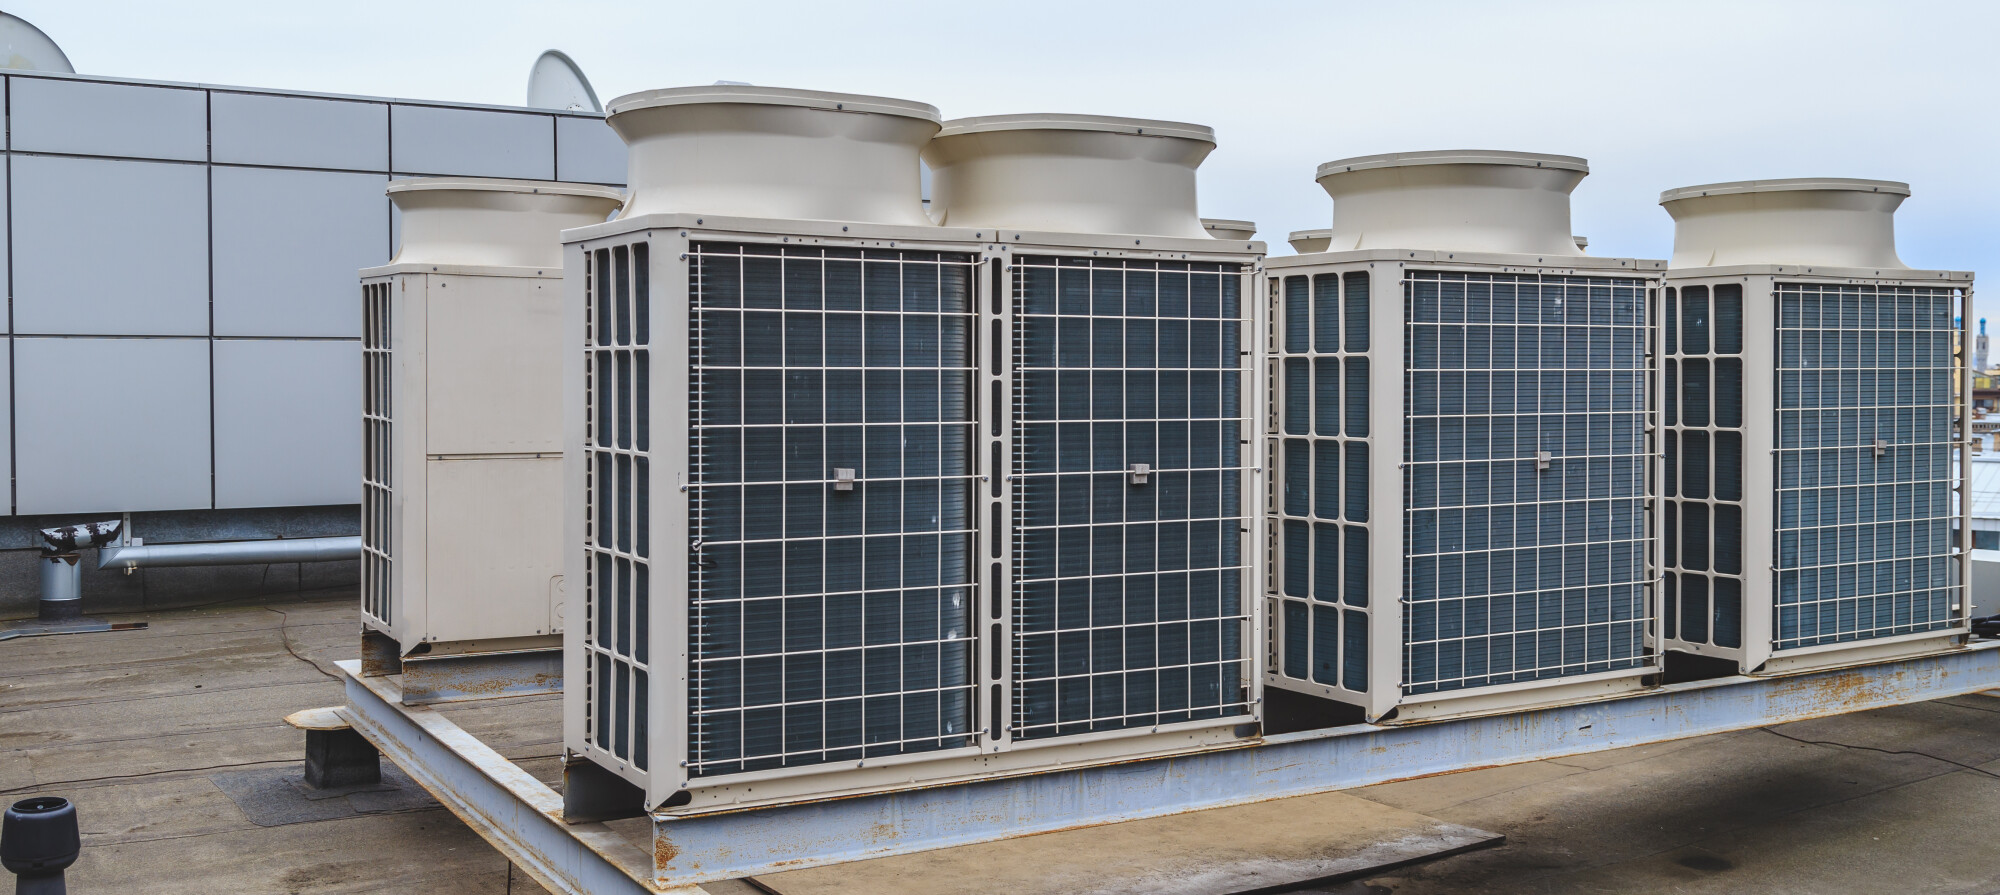 4 Tips for Hiring Reliable Commercial HVAC Services in Stillwater, OK